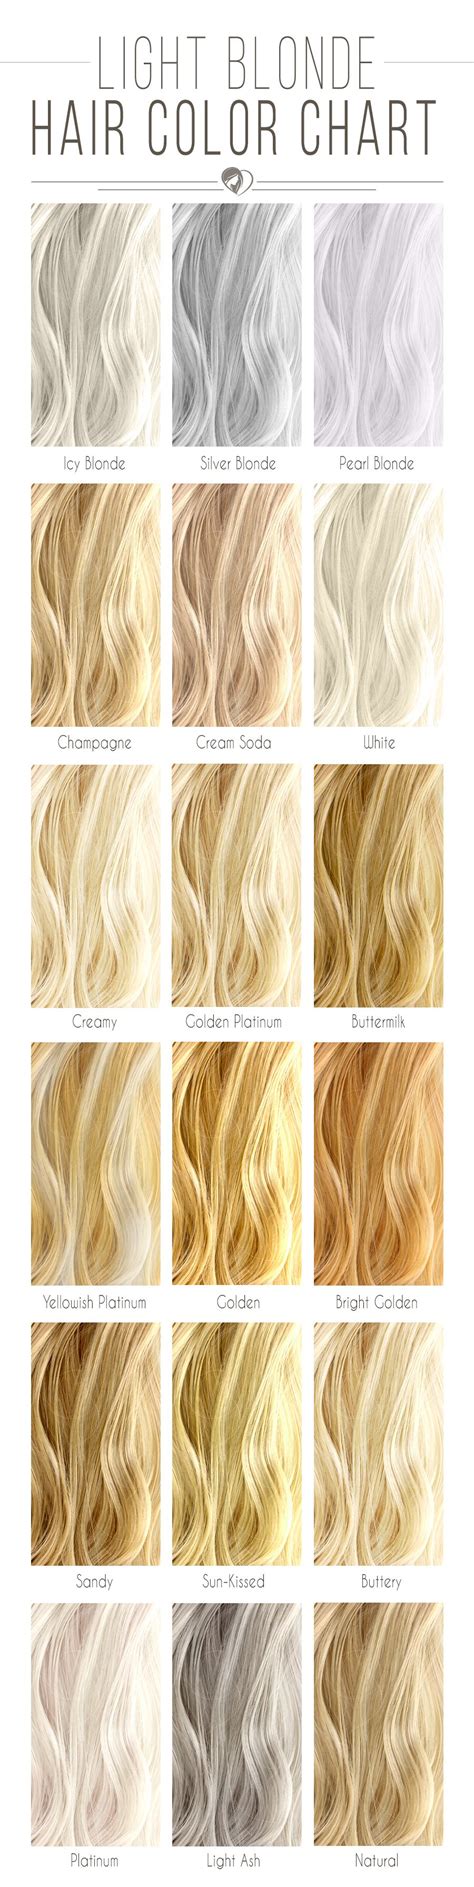 Hair Color 2017 Trendy Hair Color New Hair Colors White Hair Colors